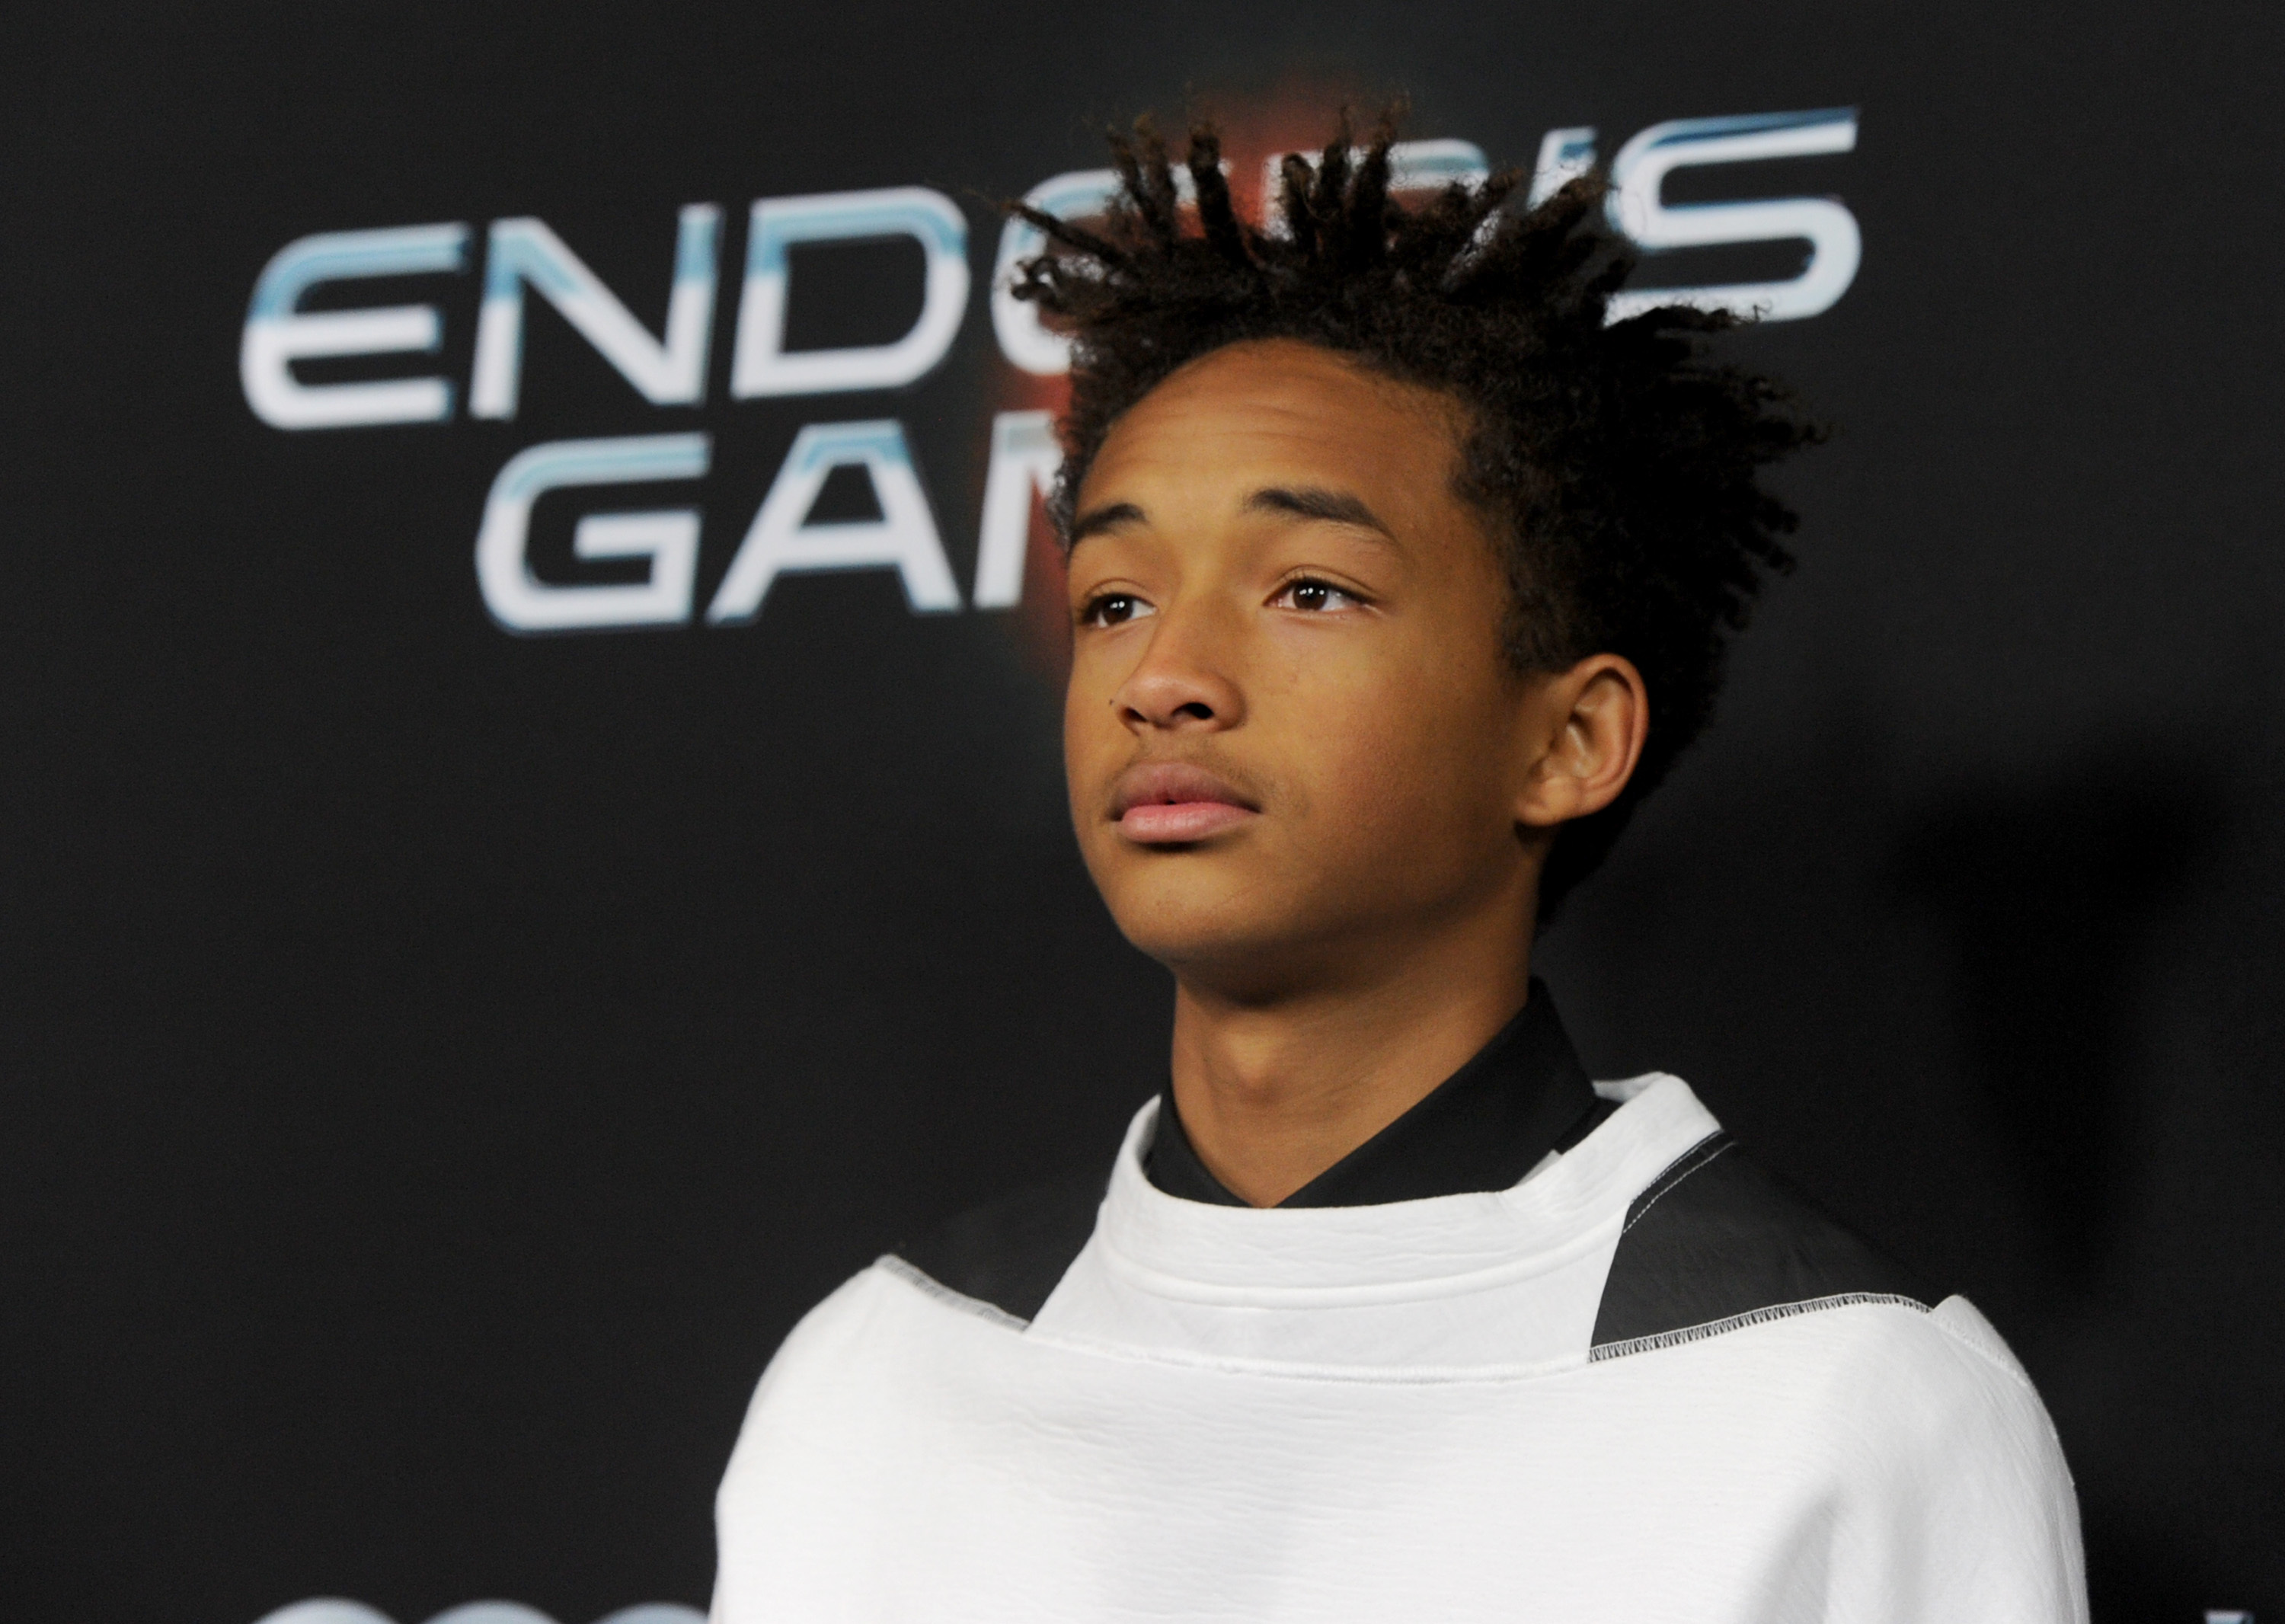 Jaden Smith Wallpapers Images Photos Pictures Backgrounds.